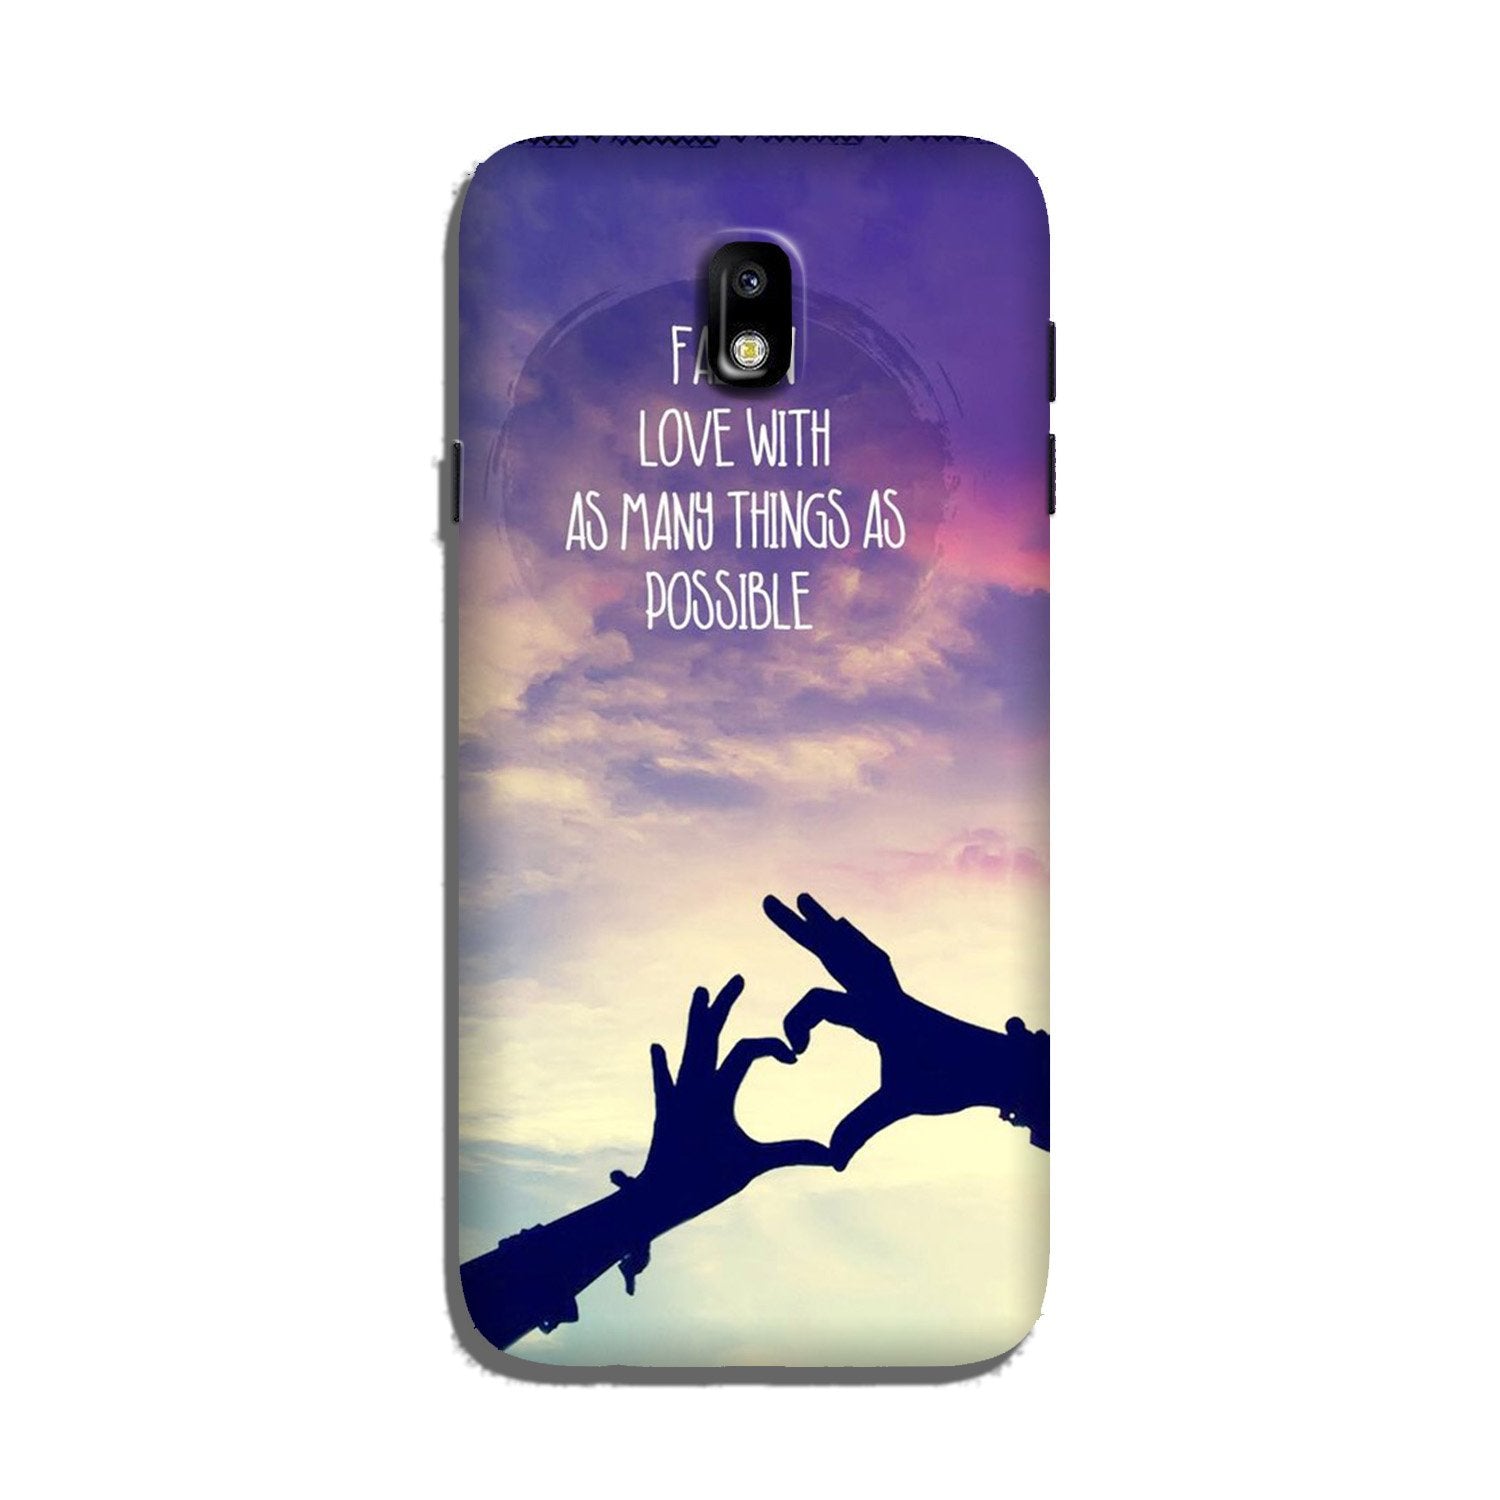 Fall in love Case for Galaxy J7 Pro